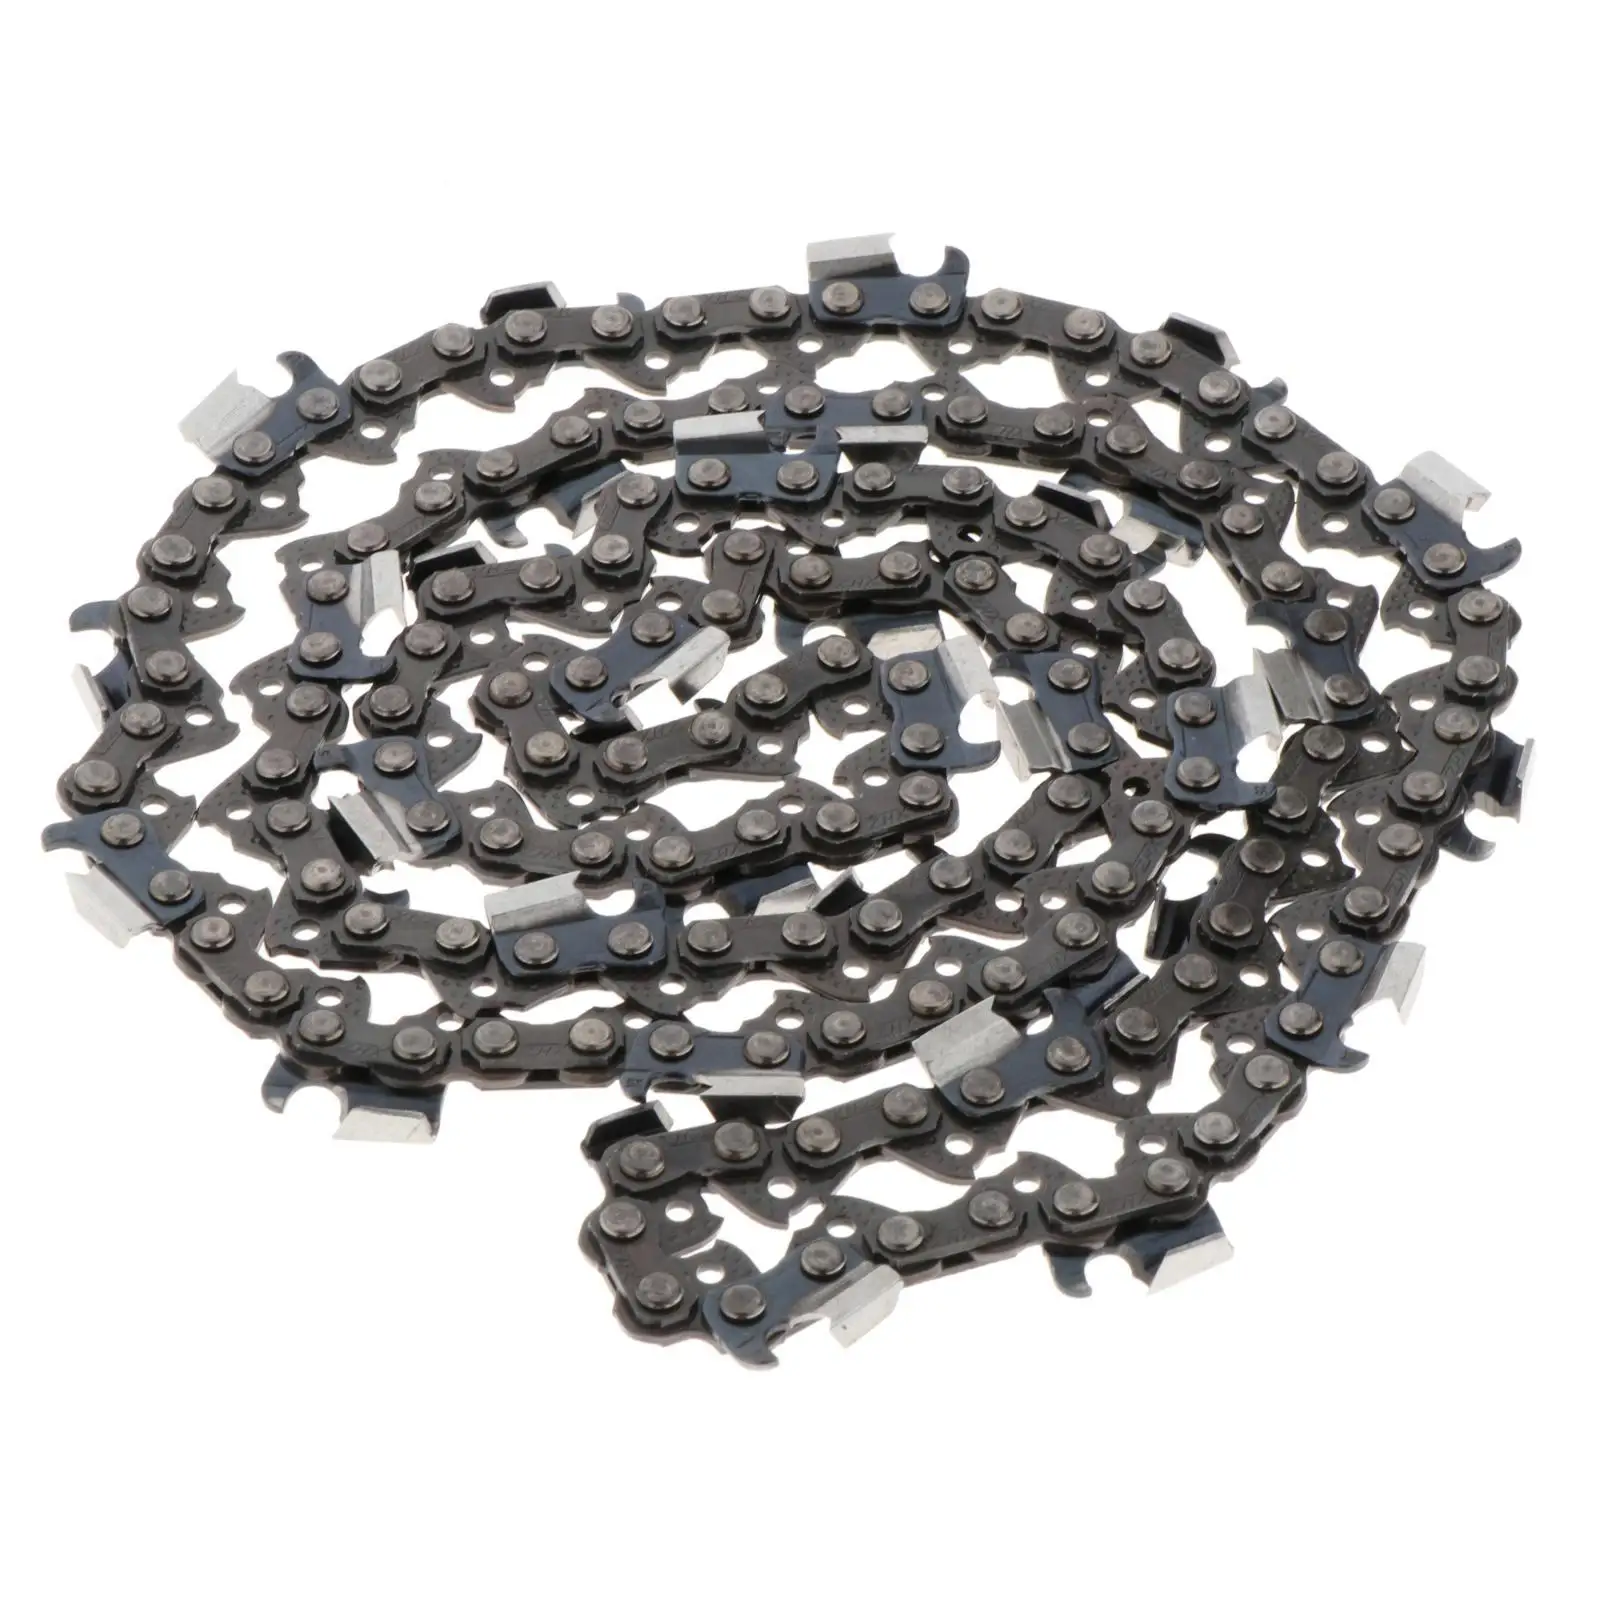 Metal Chainsaw Chain for Wood Branch Cutting Durable 16/18/20/22